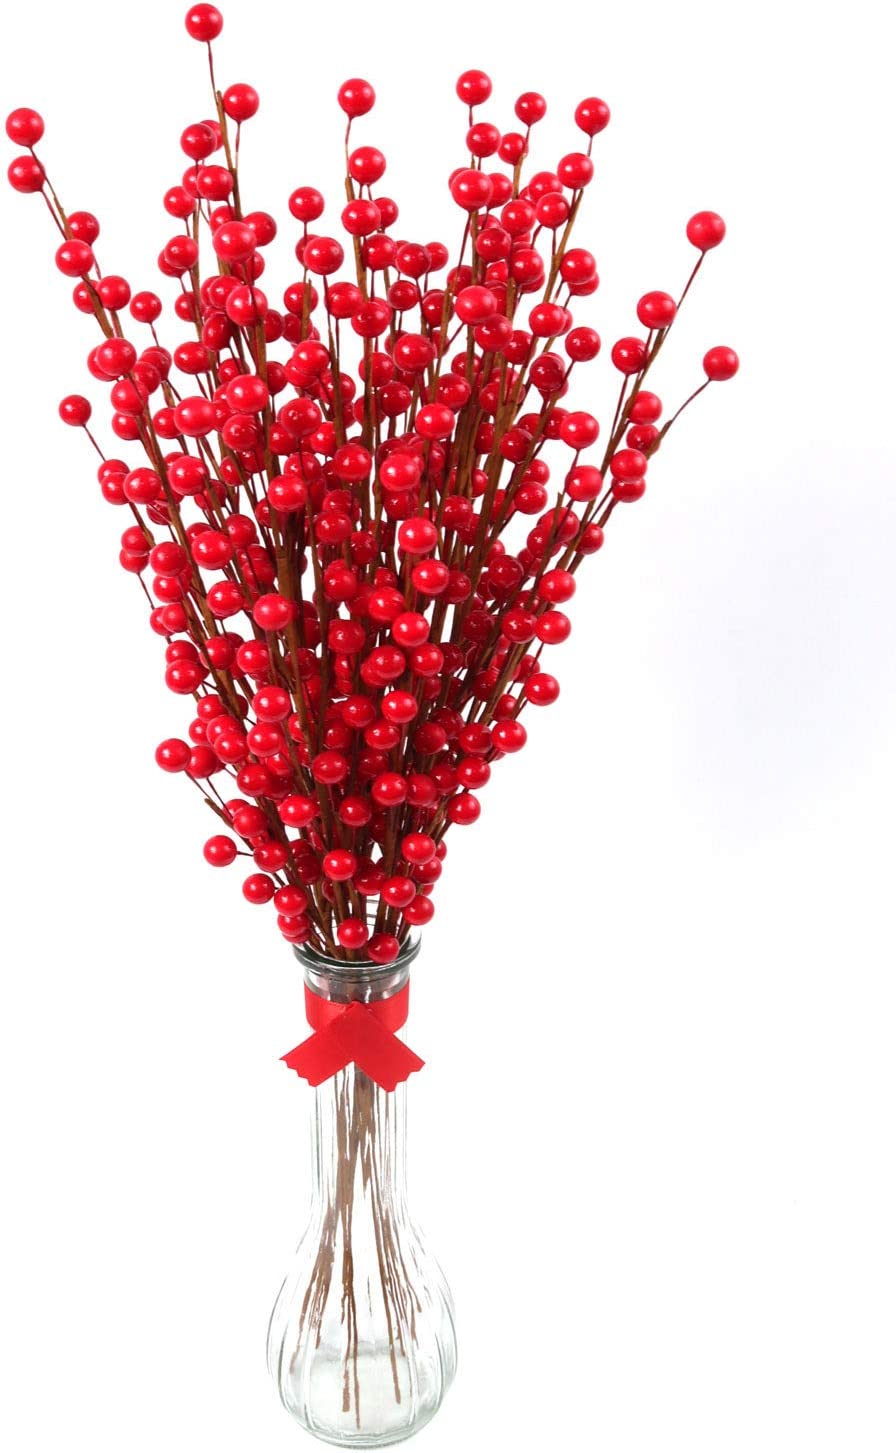 24 Artificial Red Holly Berry Stem Picks - Decorative Wire Stem Branch